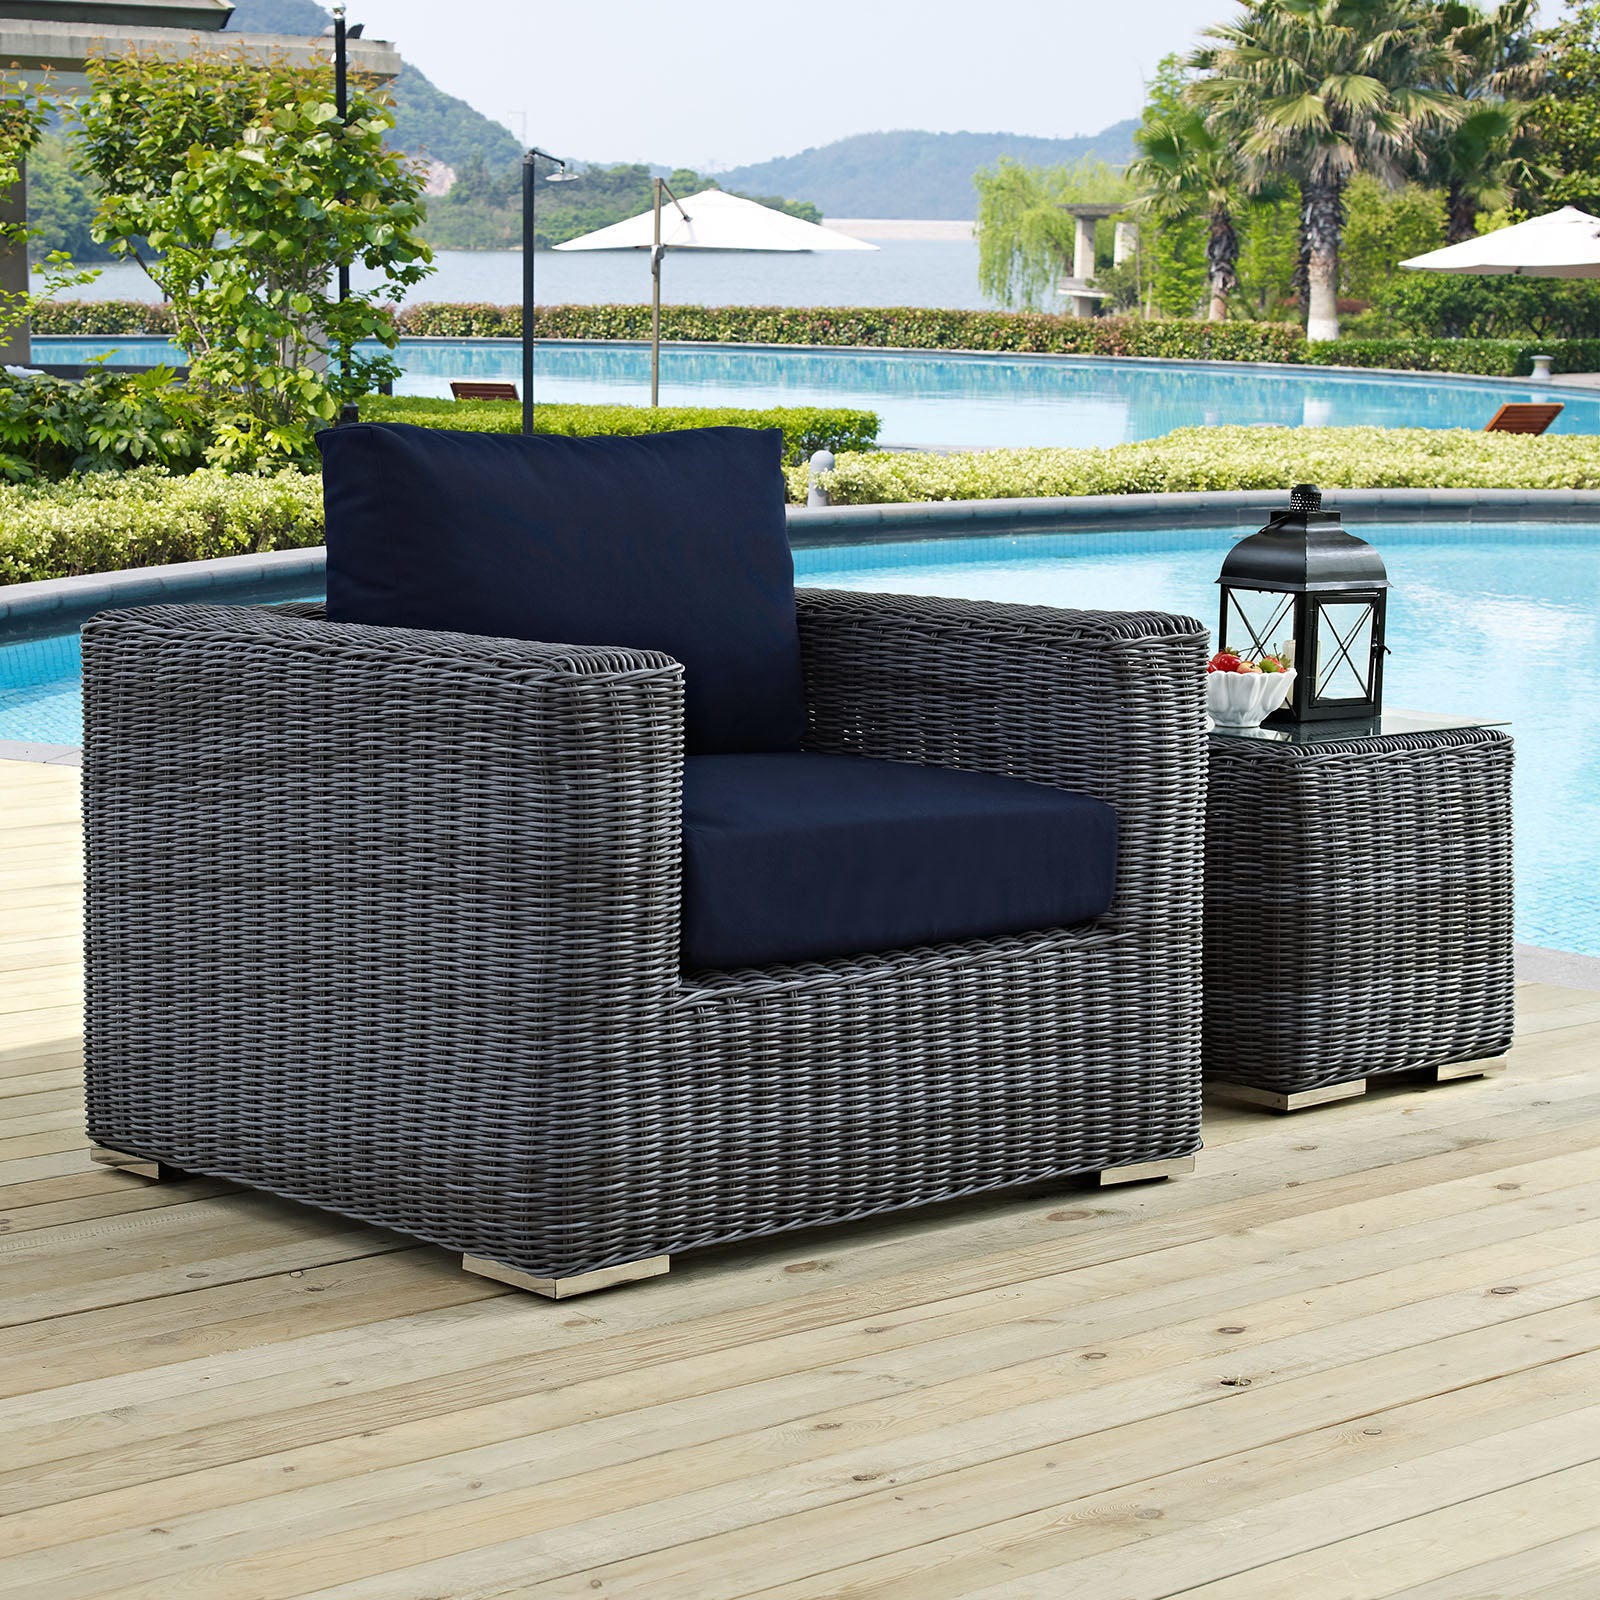 Modway Outdoor Chairs - Summon Outdoor Armchair Canvas Navy